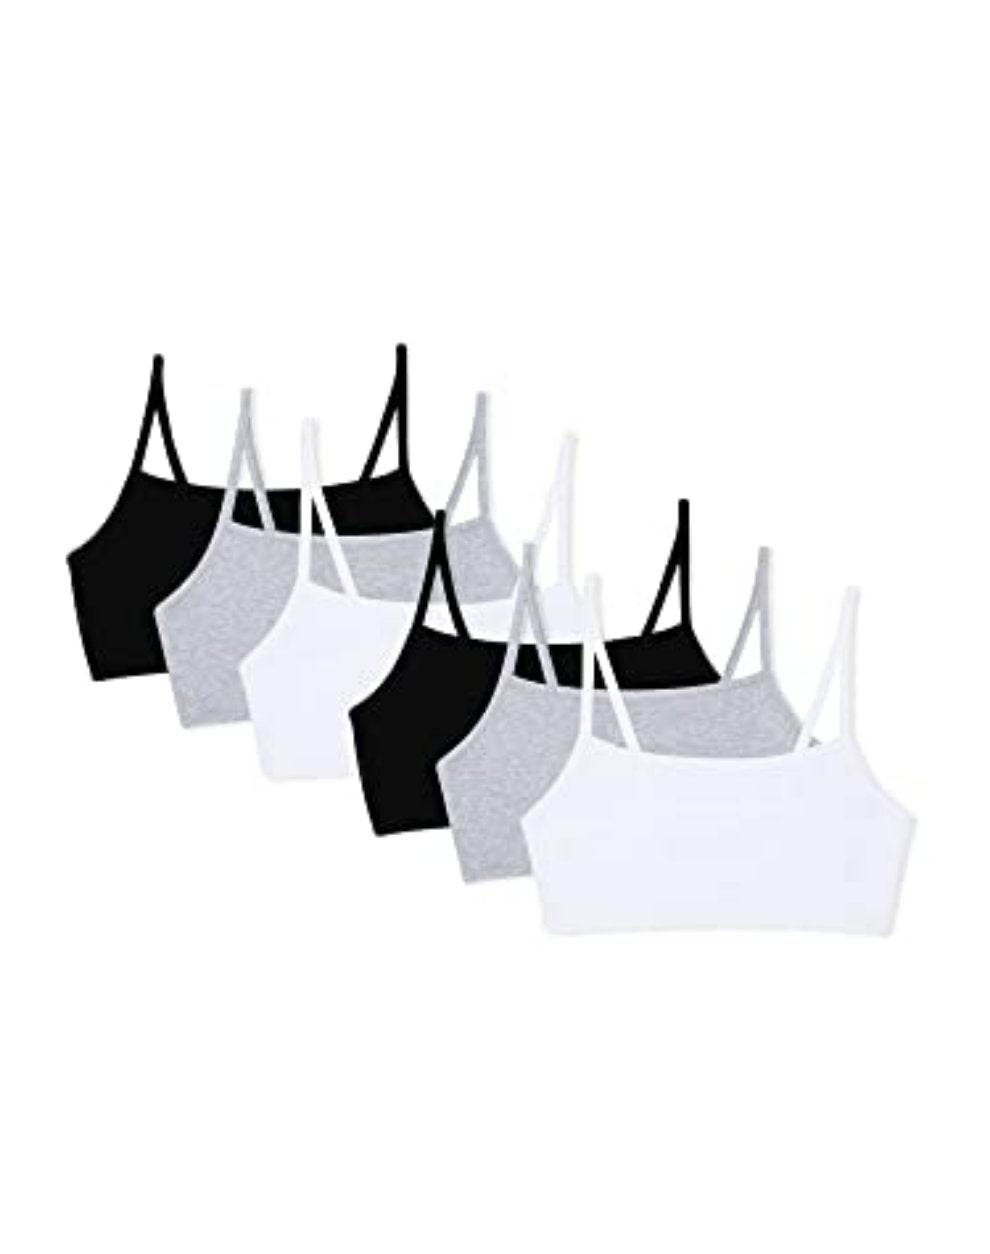 Fruit of the Loom womens Spaghetti strap Pullover Sports Bra, White/Heather Gray/Black, 6-count (2 of each color)